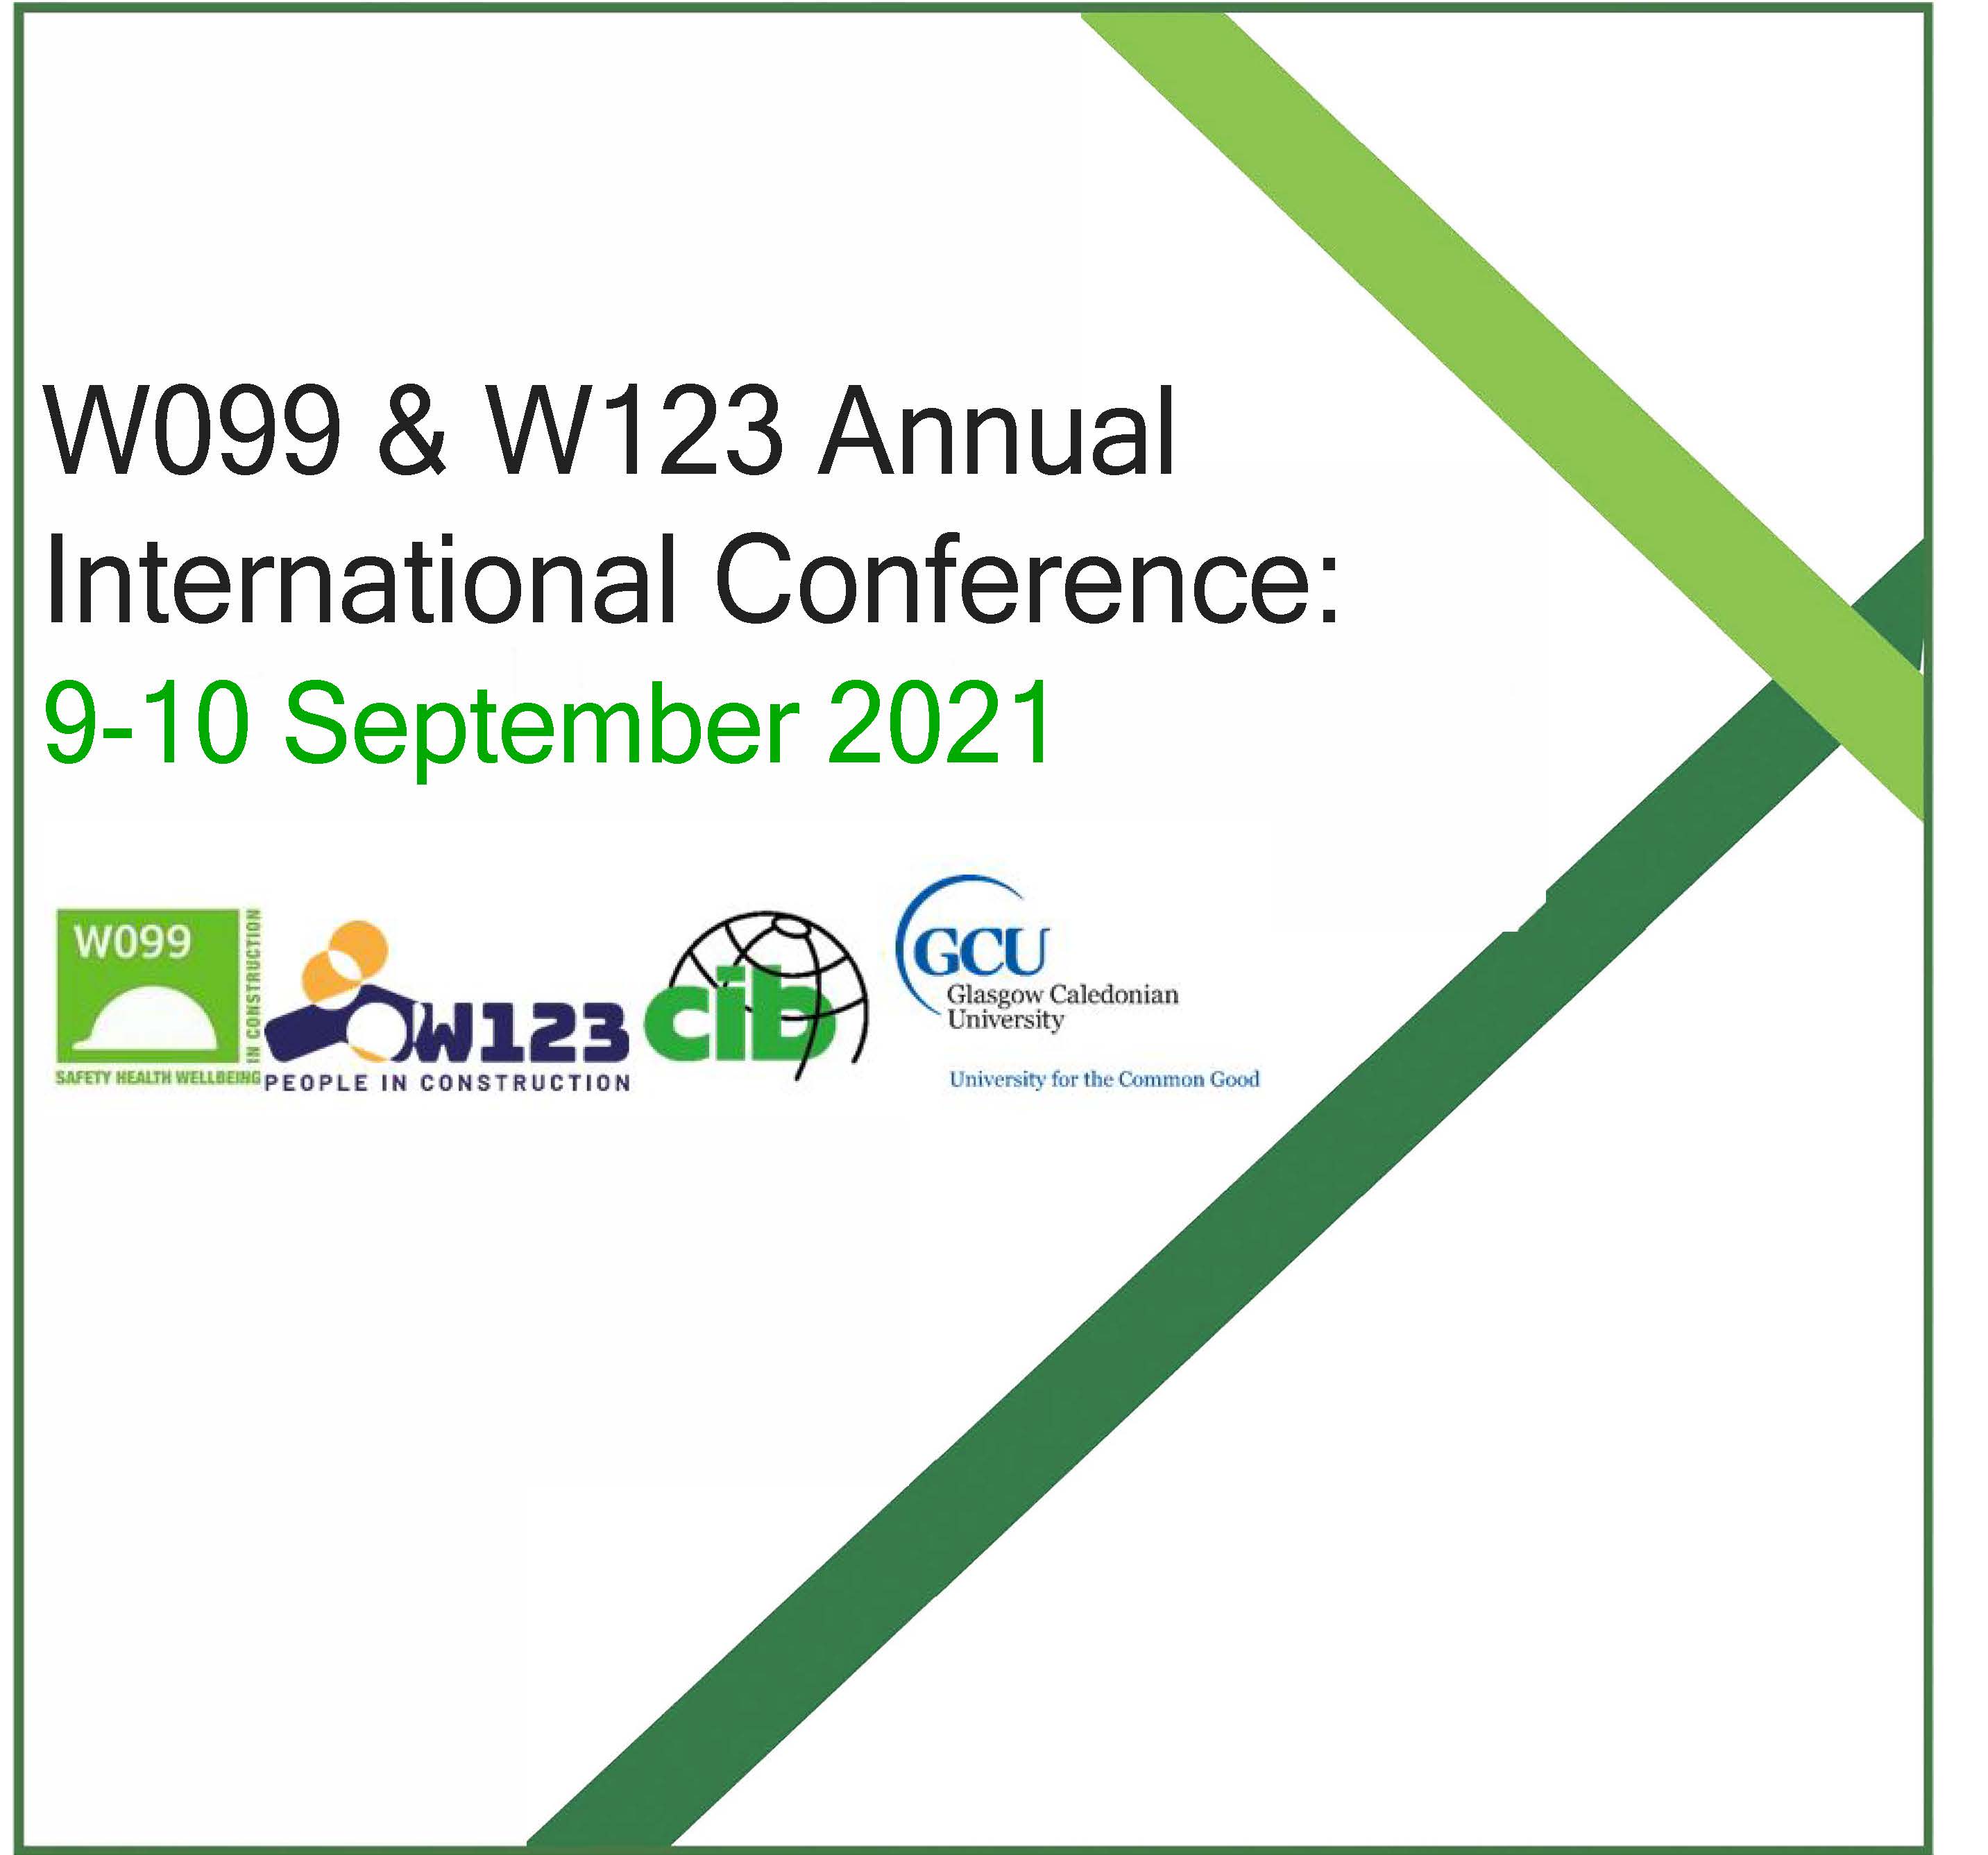 CIB W099 & W123 Annual International Conference: Changes and innovations for improved wellbeing in construction